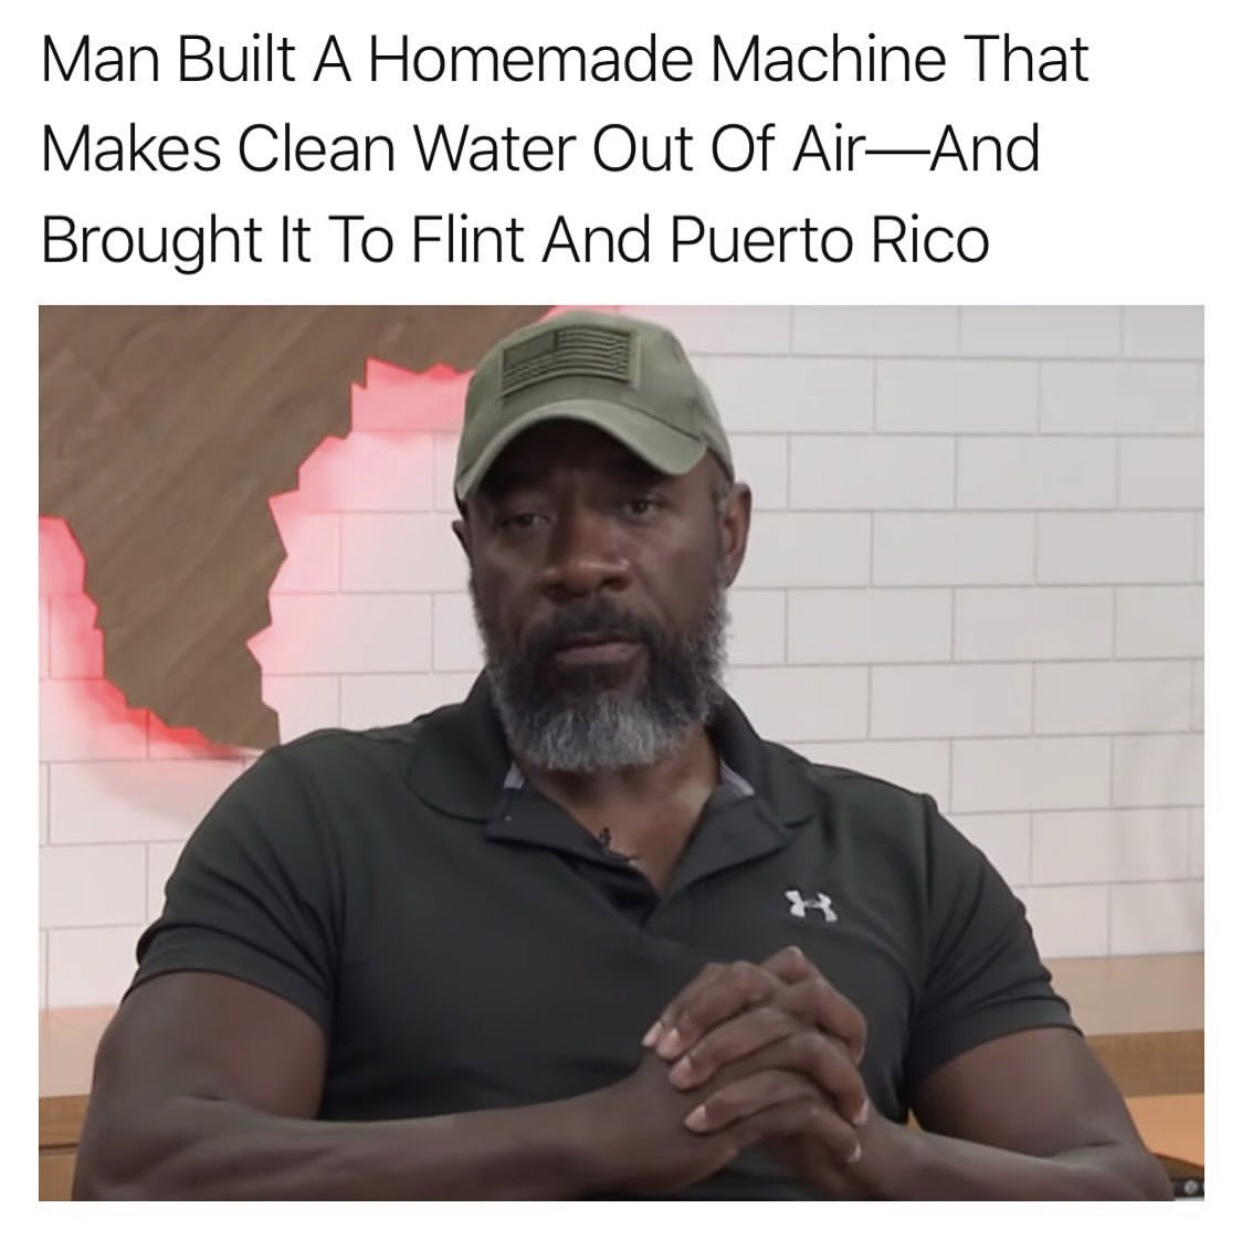 photo caption - Man Built A Homemade Machine That Makes Clean Water Out Of AirAnd Brought It To Flint And Puerto Rico